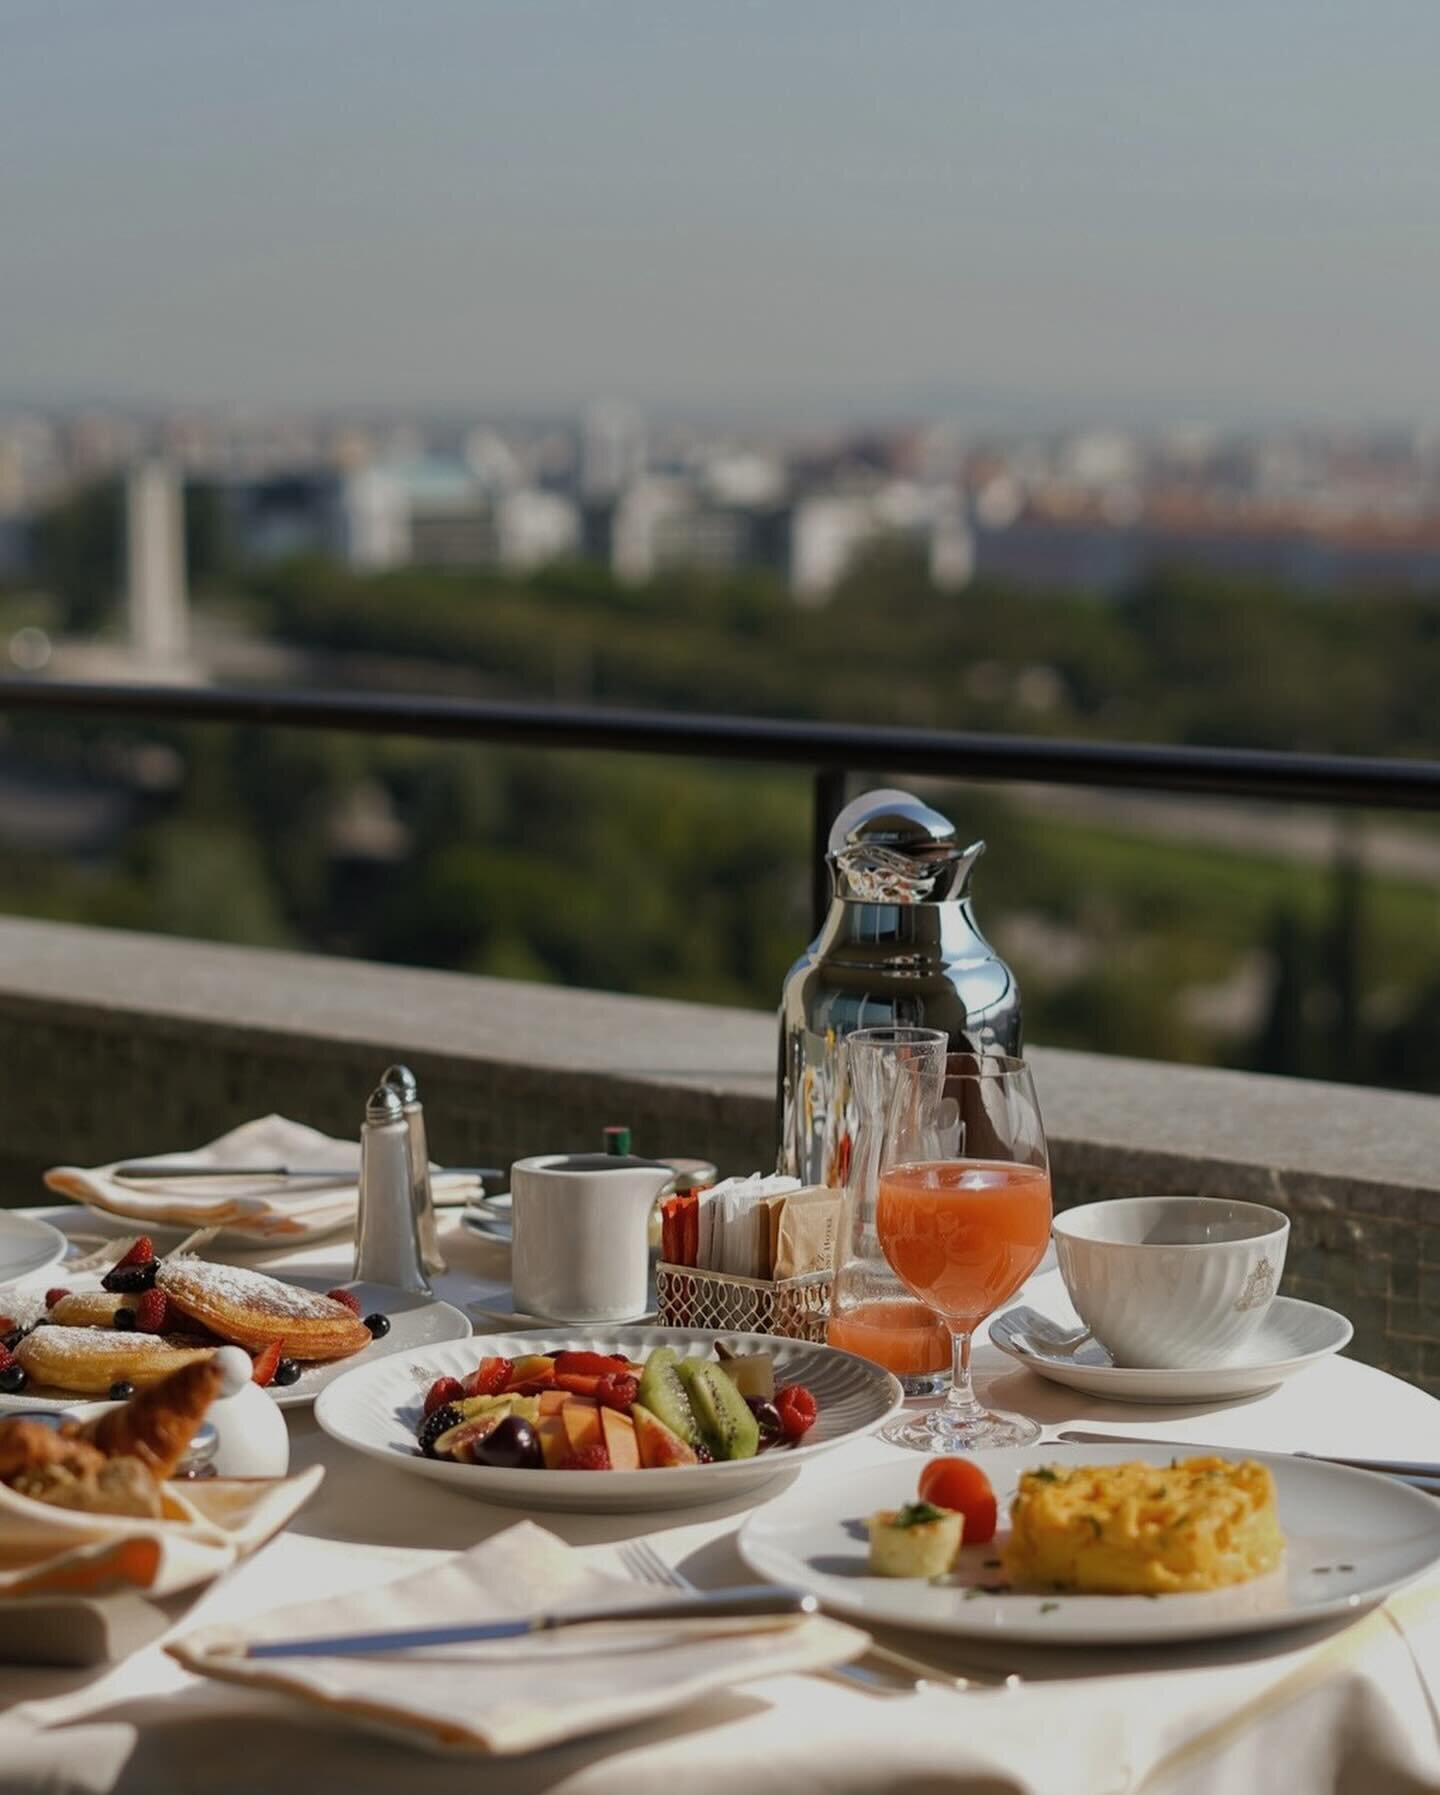 Wishing our Readers happy weekend with one of our top-picks in Portugal &mdash; a delicious breakfast in sunny Lisbon, at the iconic @fslisbon. Take advantage of our most recent reviews to plan your next escape!
&ndash;
#TheLuxuryInspector #FourSeaso